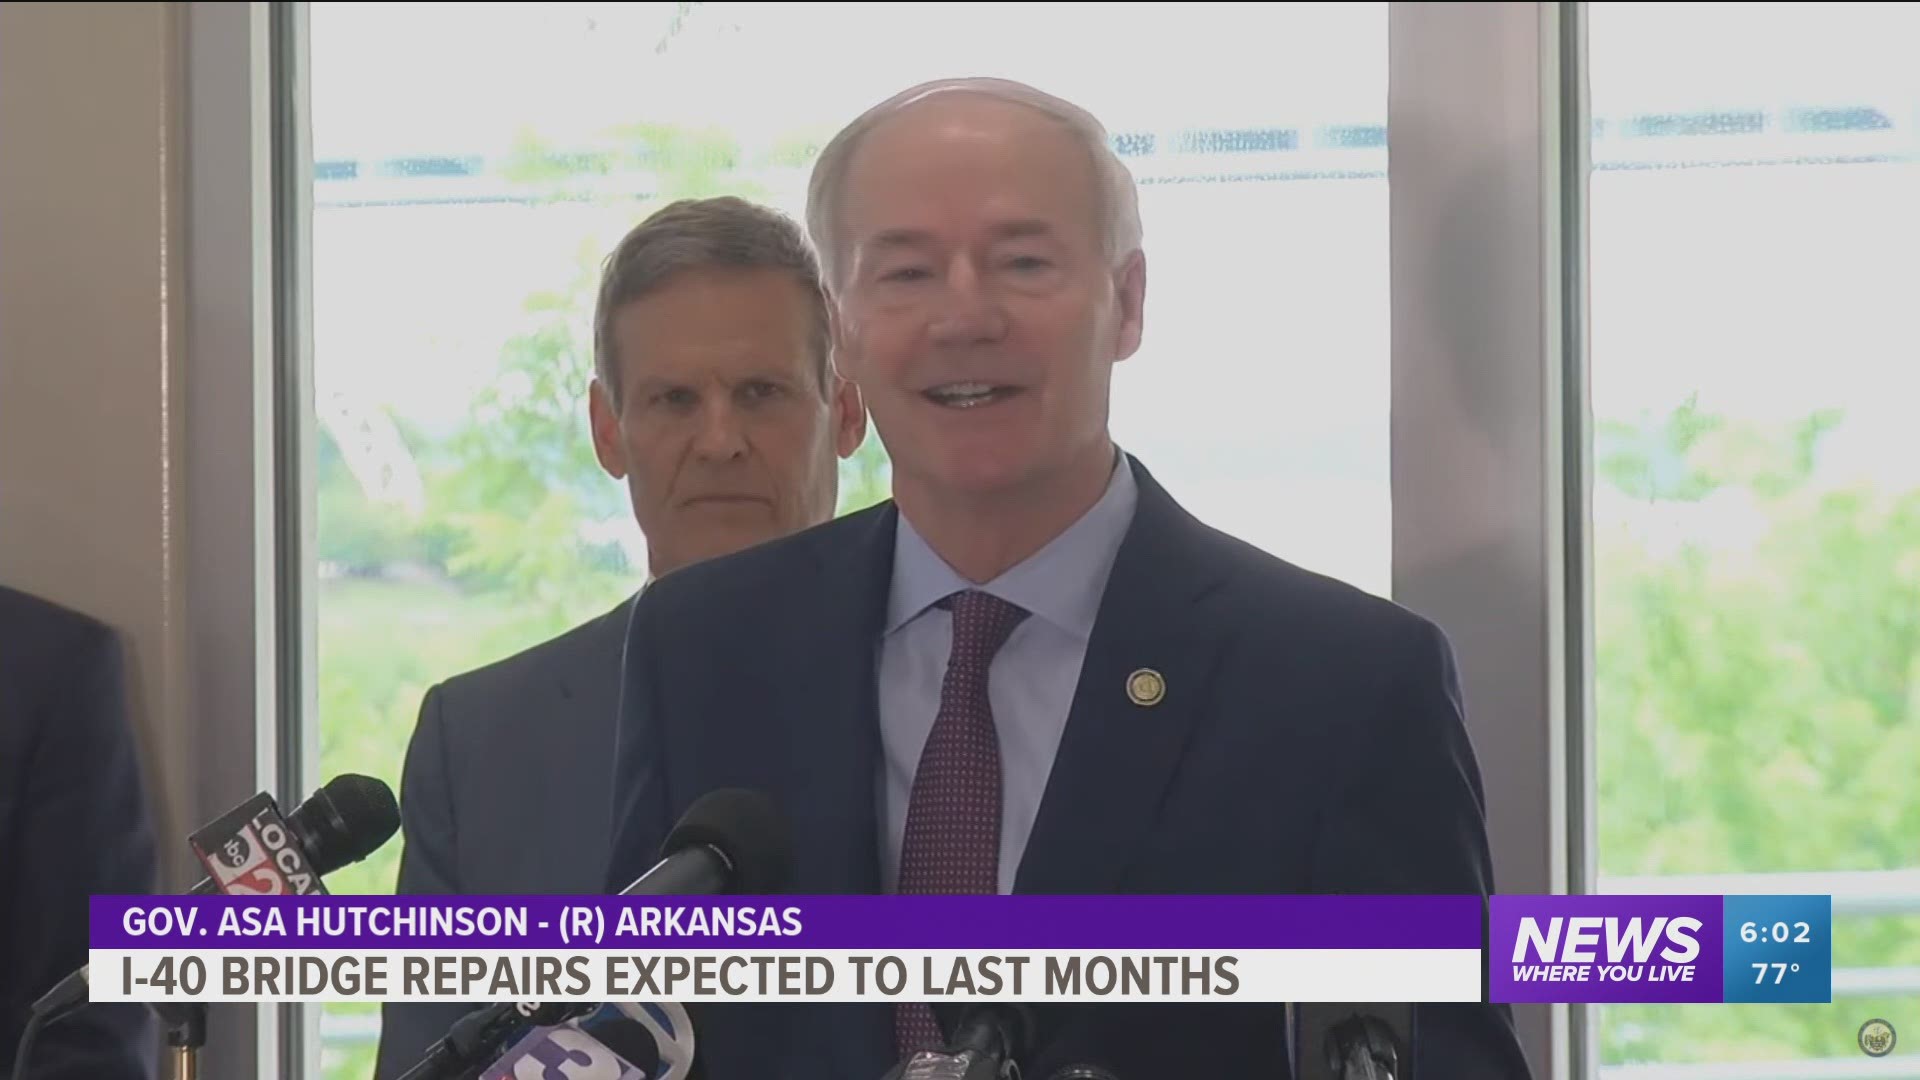 Arkansas Governor Asa Hutchinson joined Tennessee Governor Bill Lee Tuesday to discuss the status of the damaged I-40 bridge between the two states.